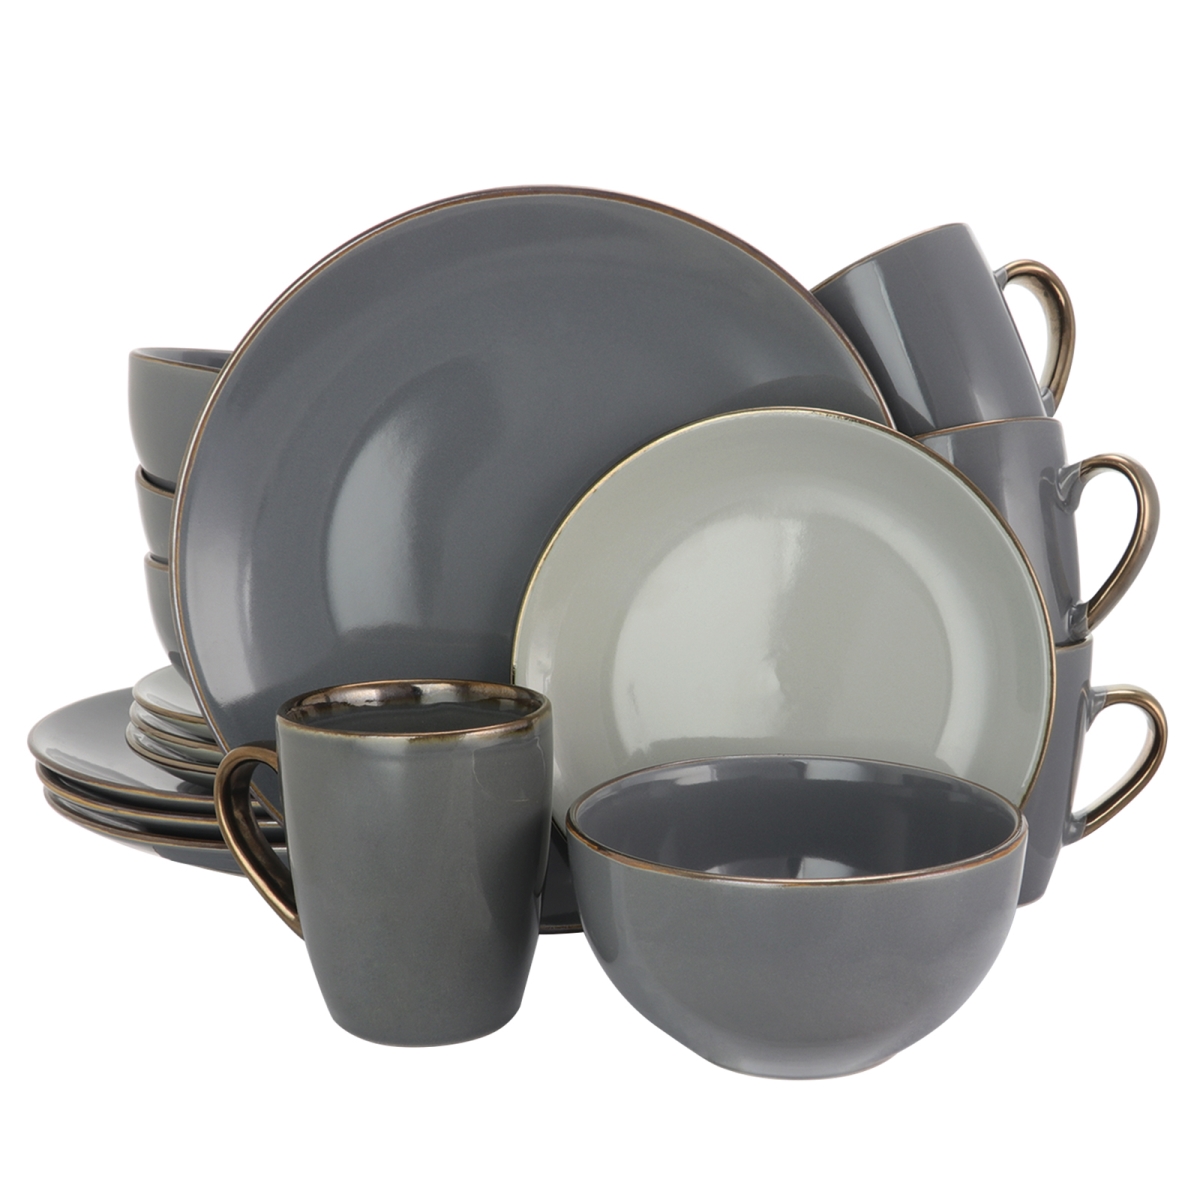 El-tahitiangrand 16 Piece Tahitian Grand Luxurious Stoneware Dinnerware Set With Complete Setting For 4 - Stone & Slate